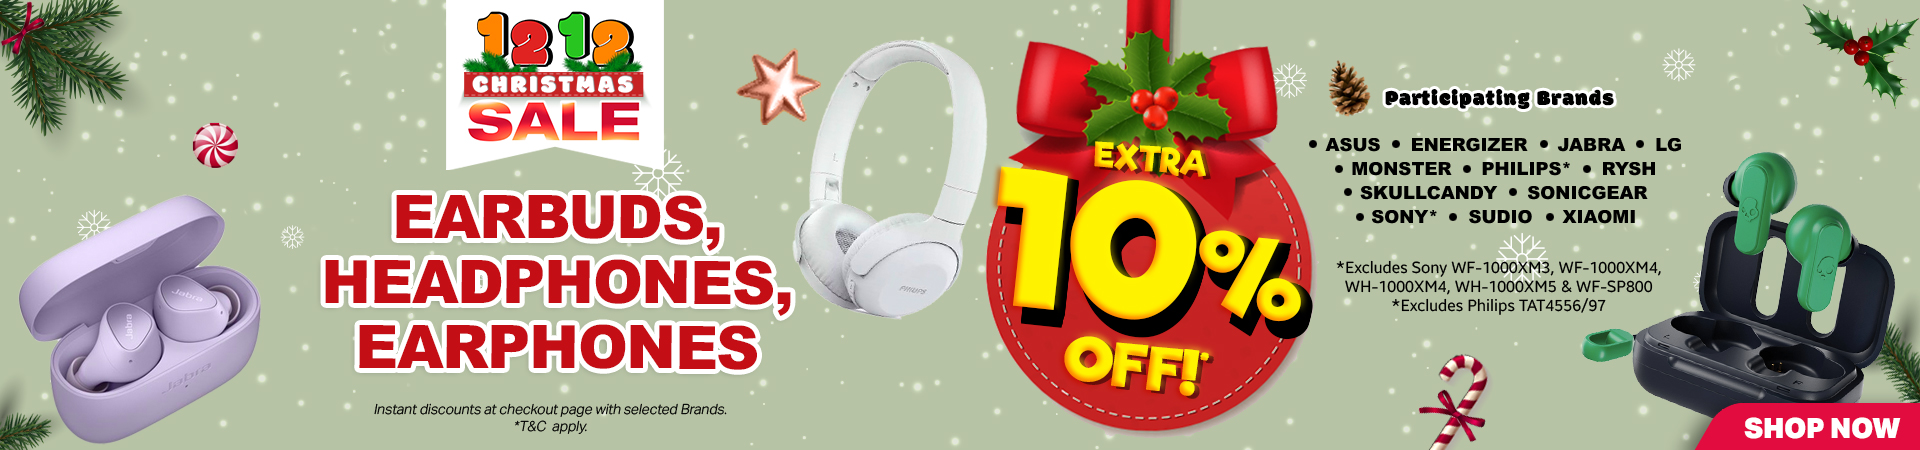 12.12 Earbuds Sale!